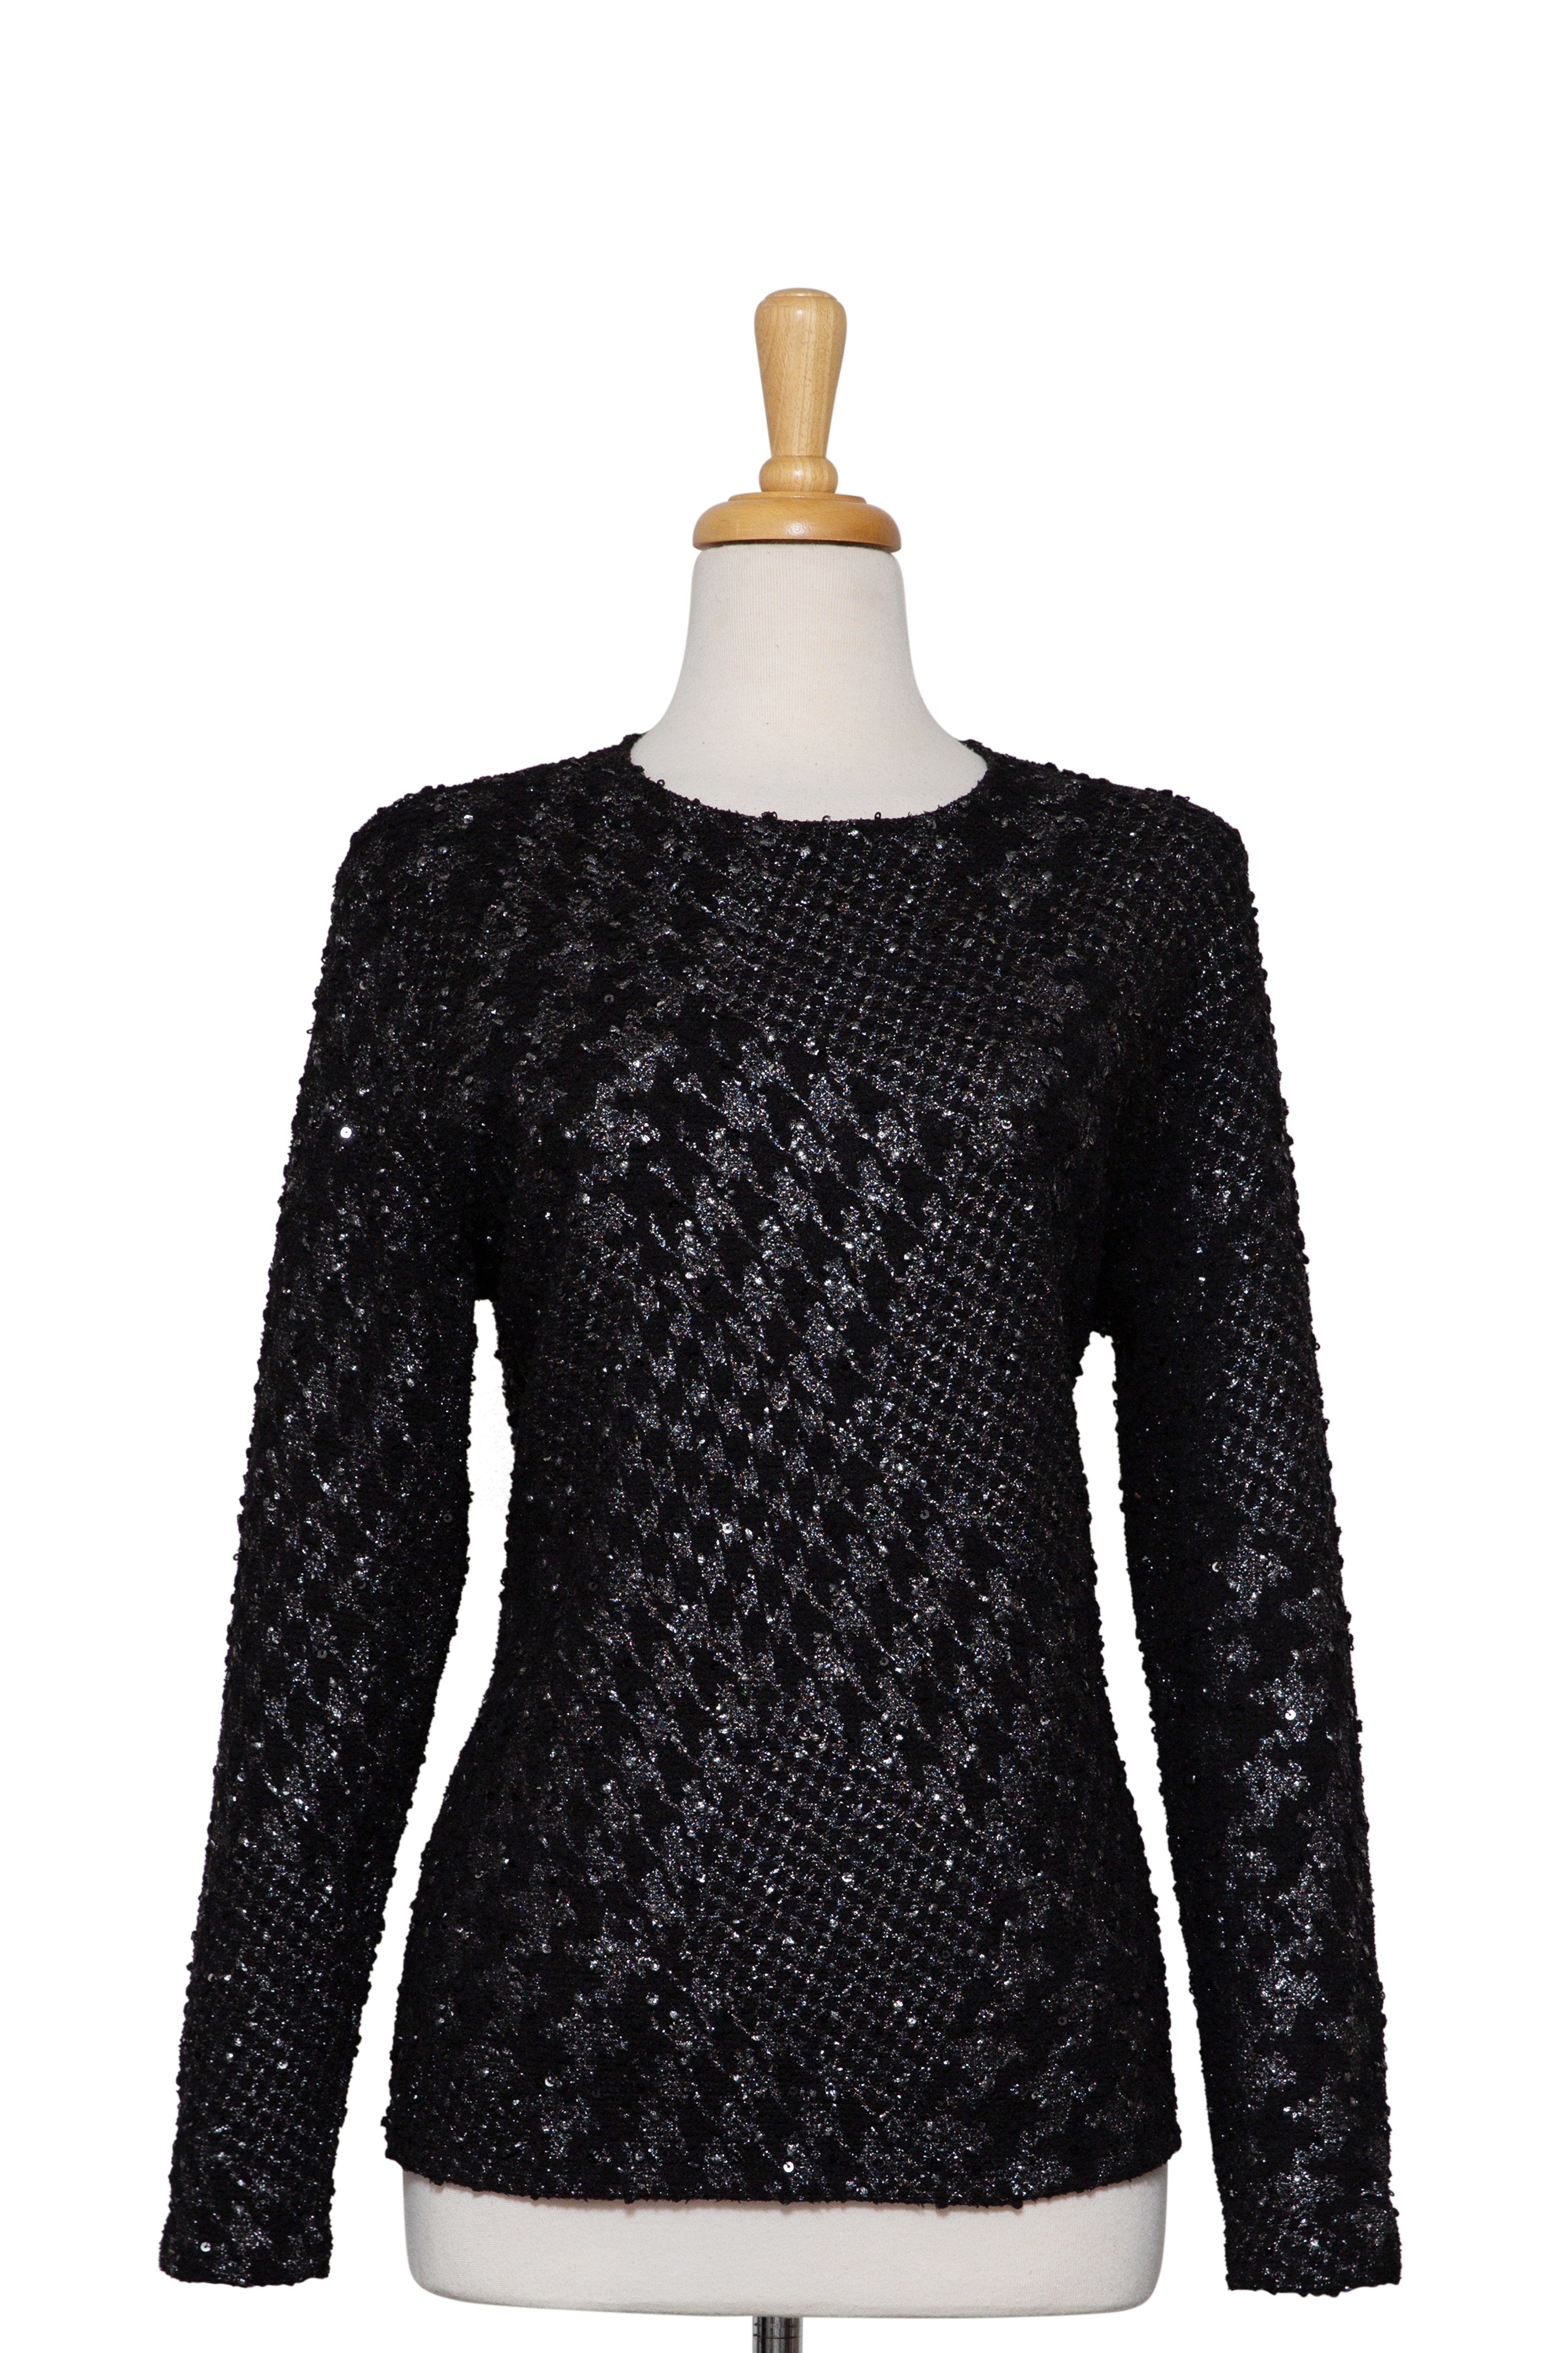 with Dispersed Knit Boucle Silver and Sequins Black Metallic Long Top Sleeve